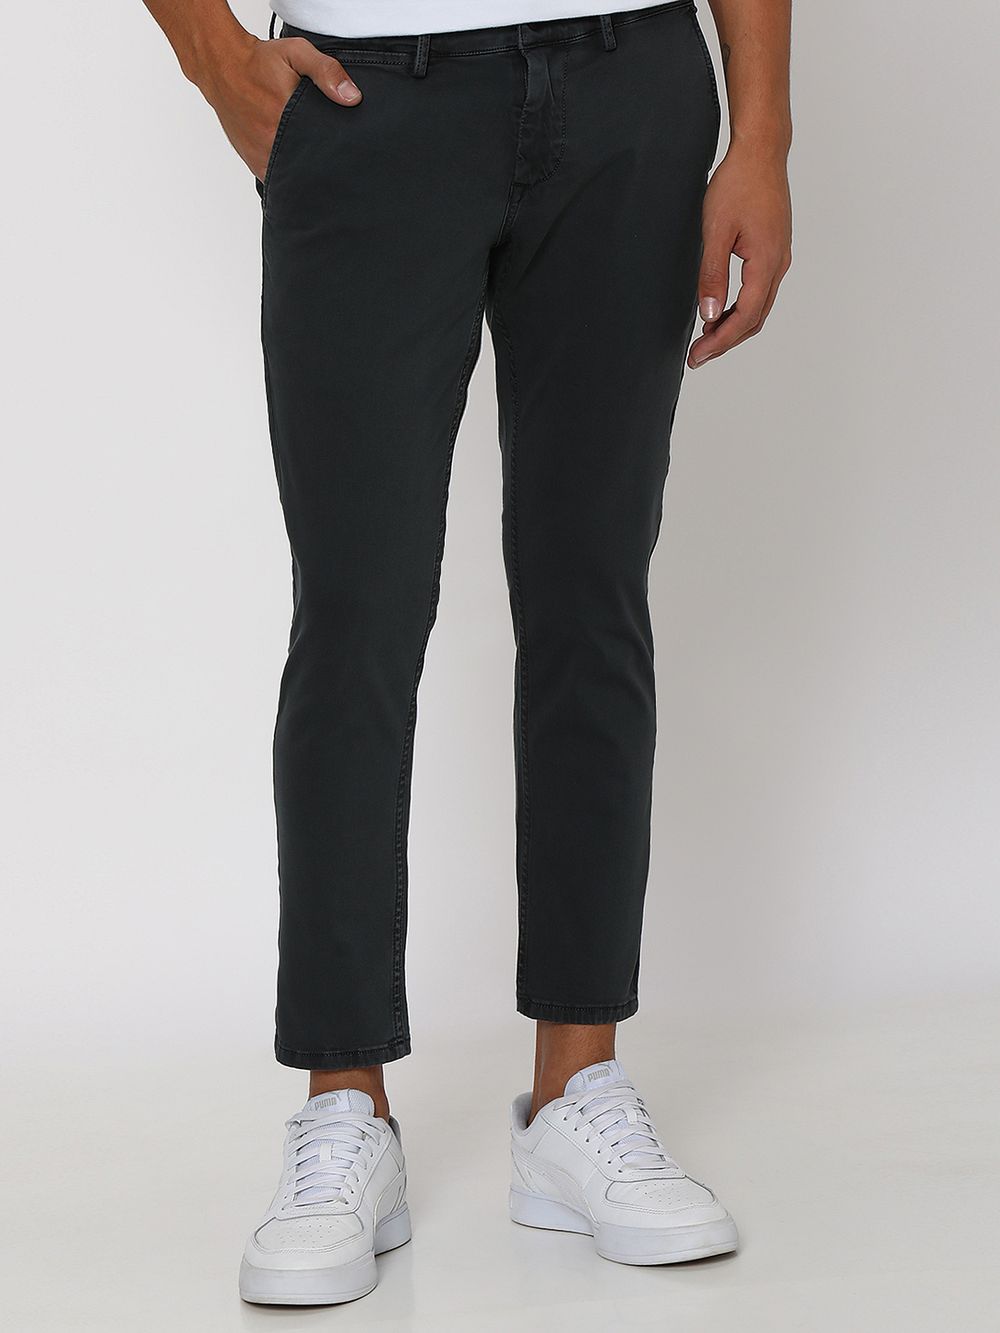 Grey Ankle Length Stretch Chinos